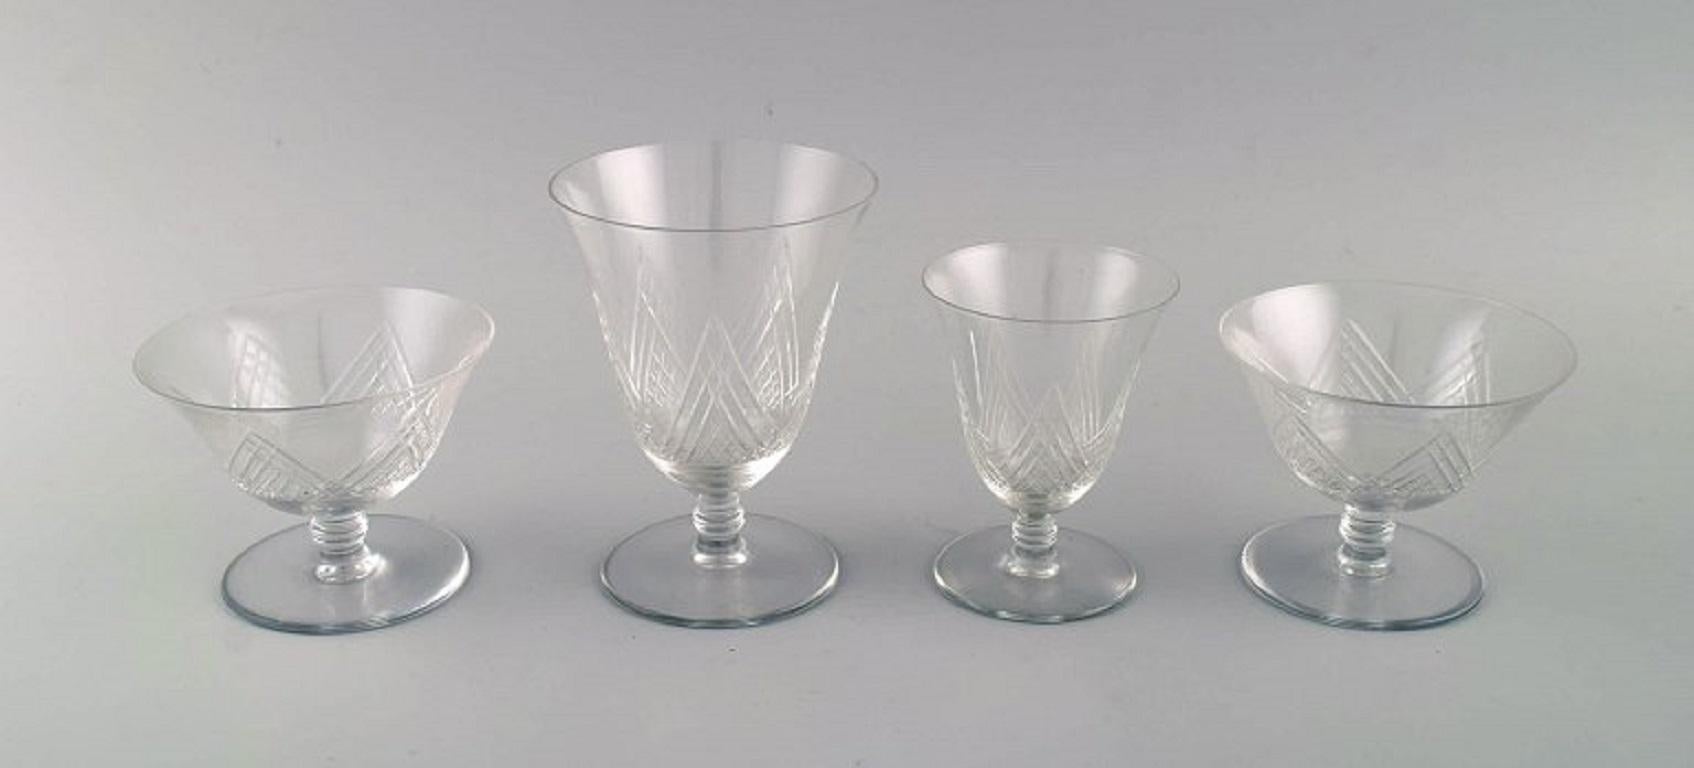 Saint-Louis, France. Four glasses in clear mouth-blown crystal glass. 1930s.
Largest glass measures: 12 x 9 cm.
Smallest glass measures: 9.5 x 7 cm.
In excellent condition.